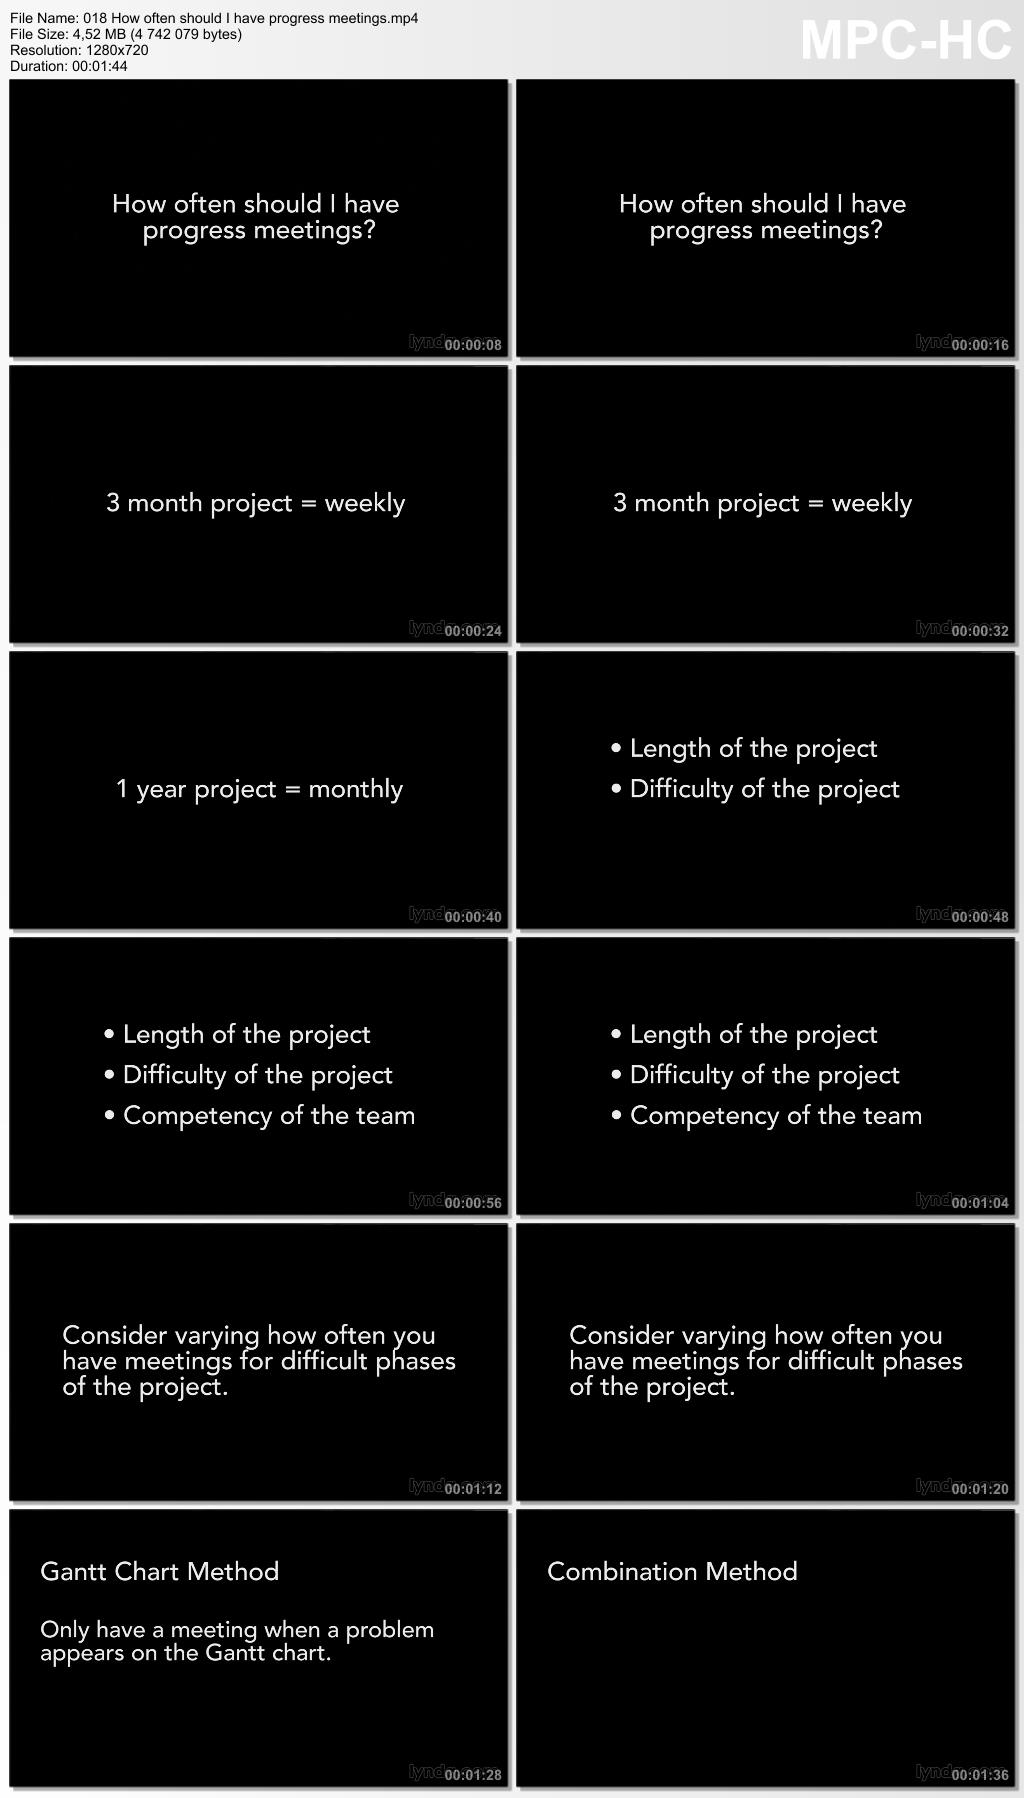 Lynda - Solving Common Project Problems